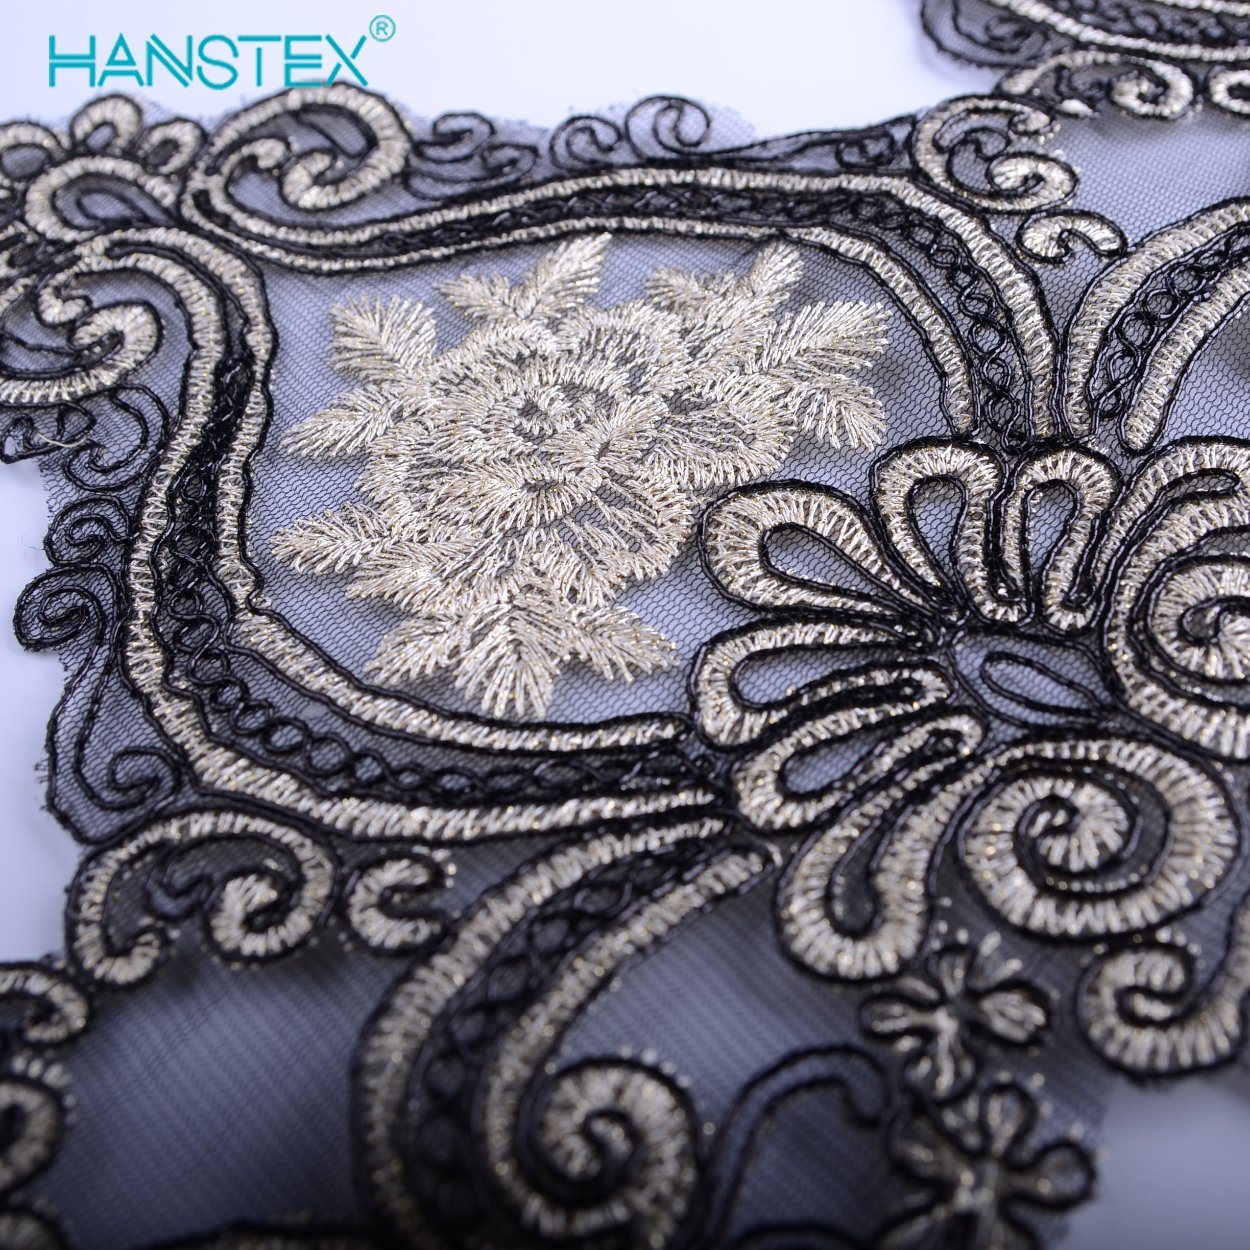 Hans Most Popular New Design Embroidery Lace on Organza